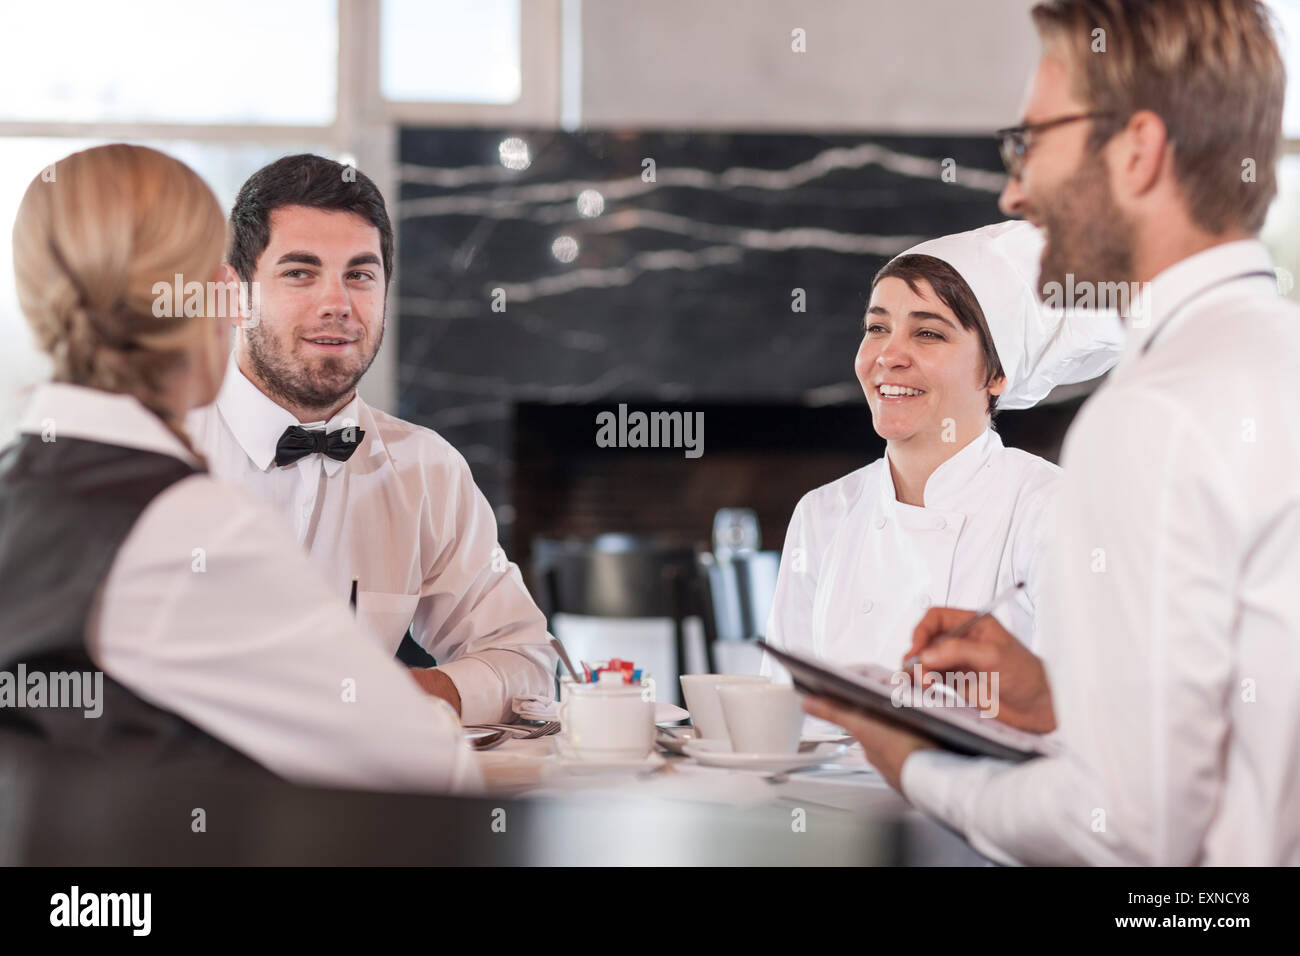 Restaurant team discussing menue and reservations Stock Photo